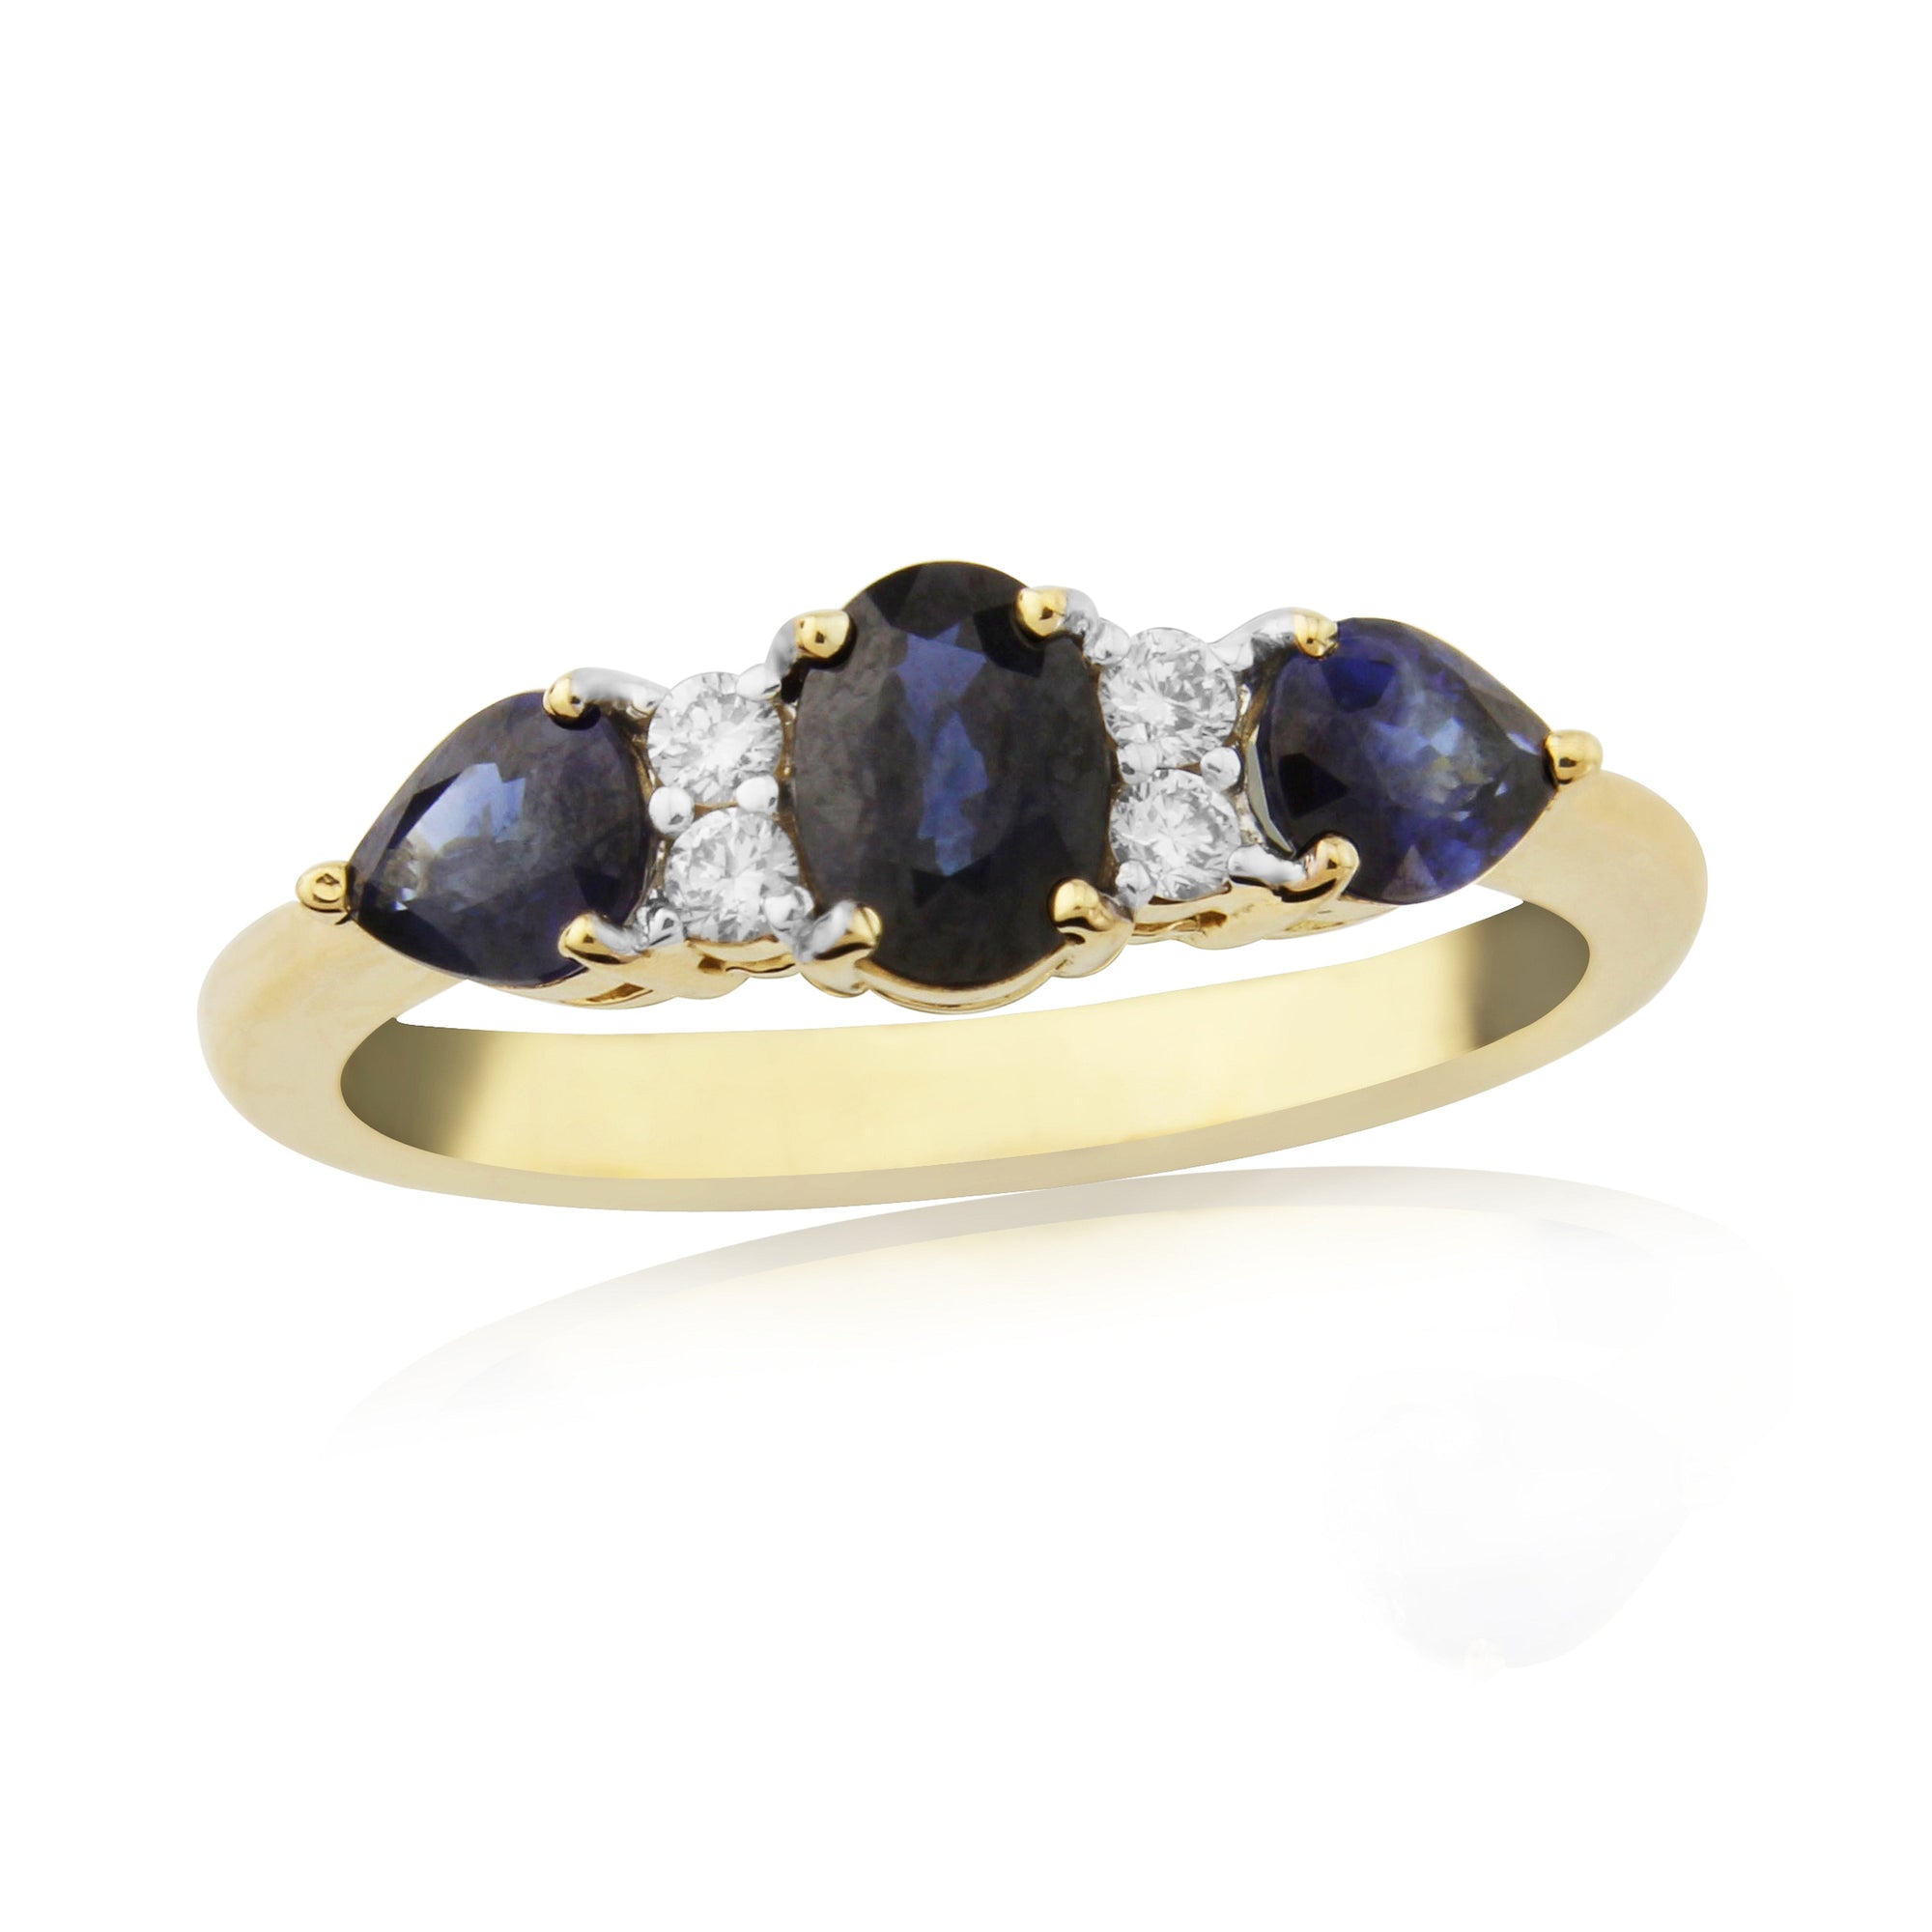 9ct 6x4mm oval sapphire with two 5x4mm pear shape sapphires & diamond ring 0.11ct